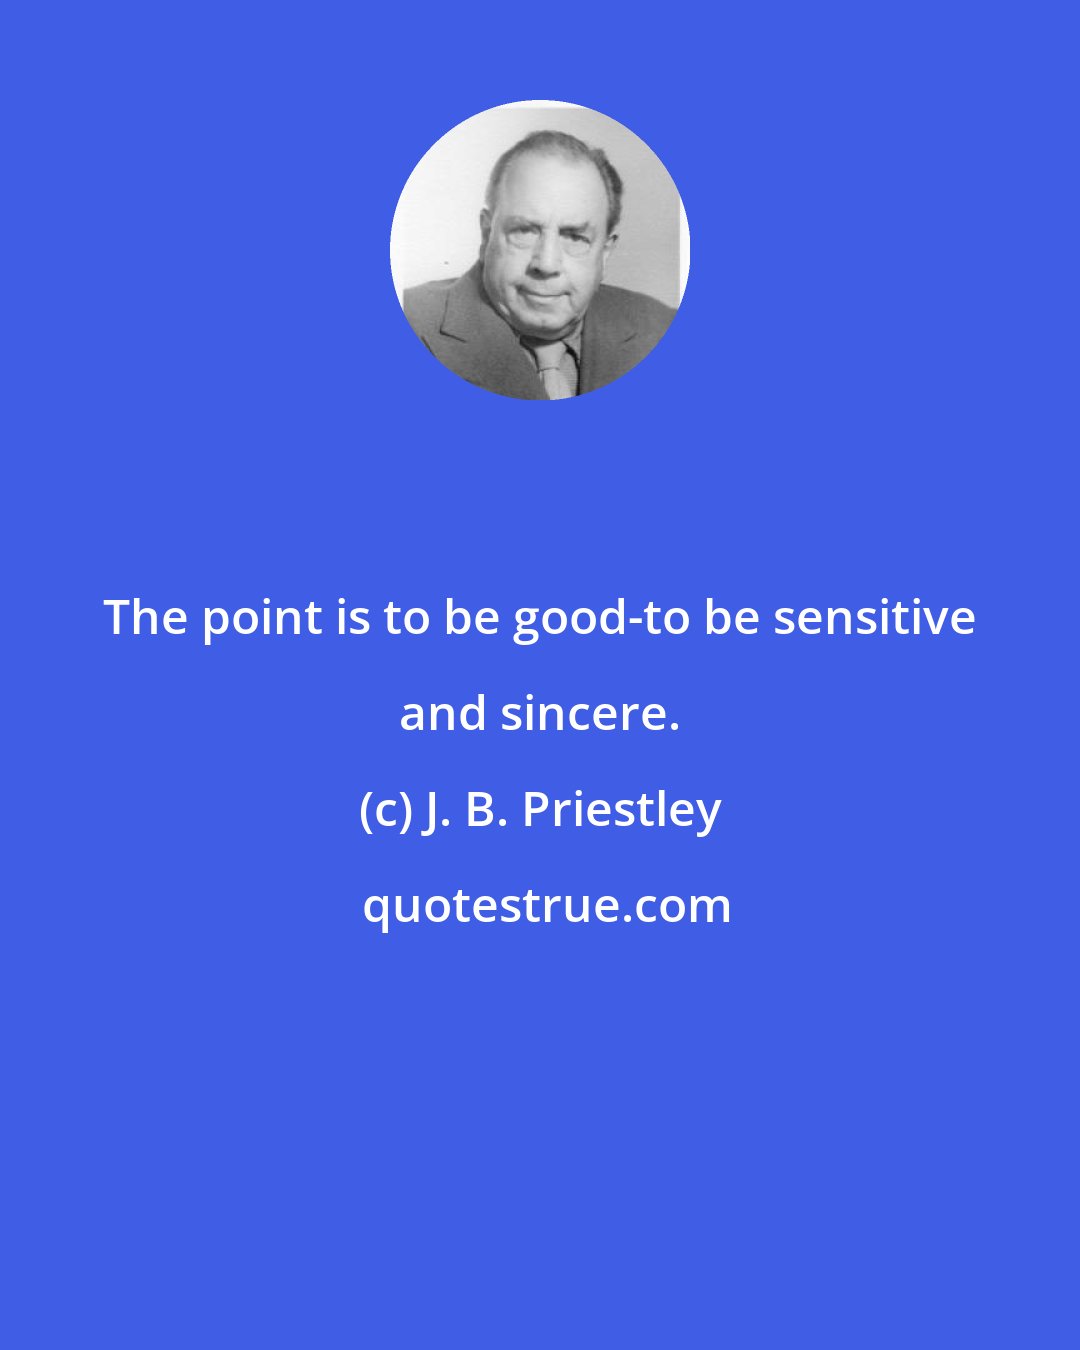 J. B. Priestley: The point is to be good-to be sensitive and sincere.